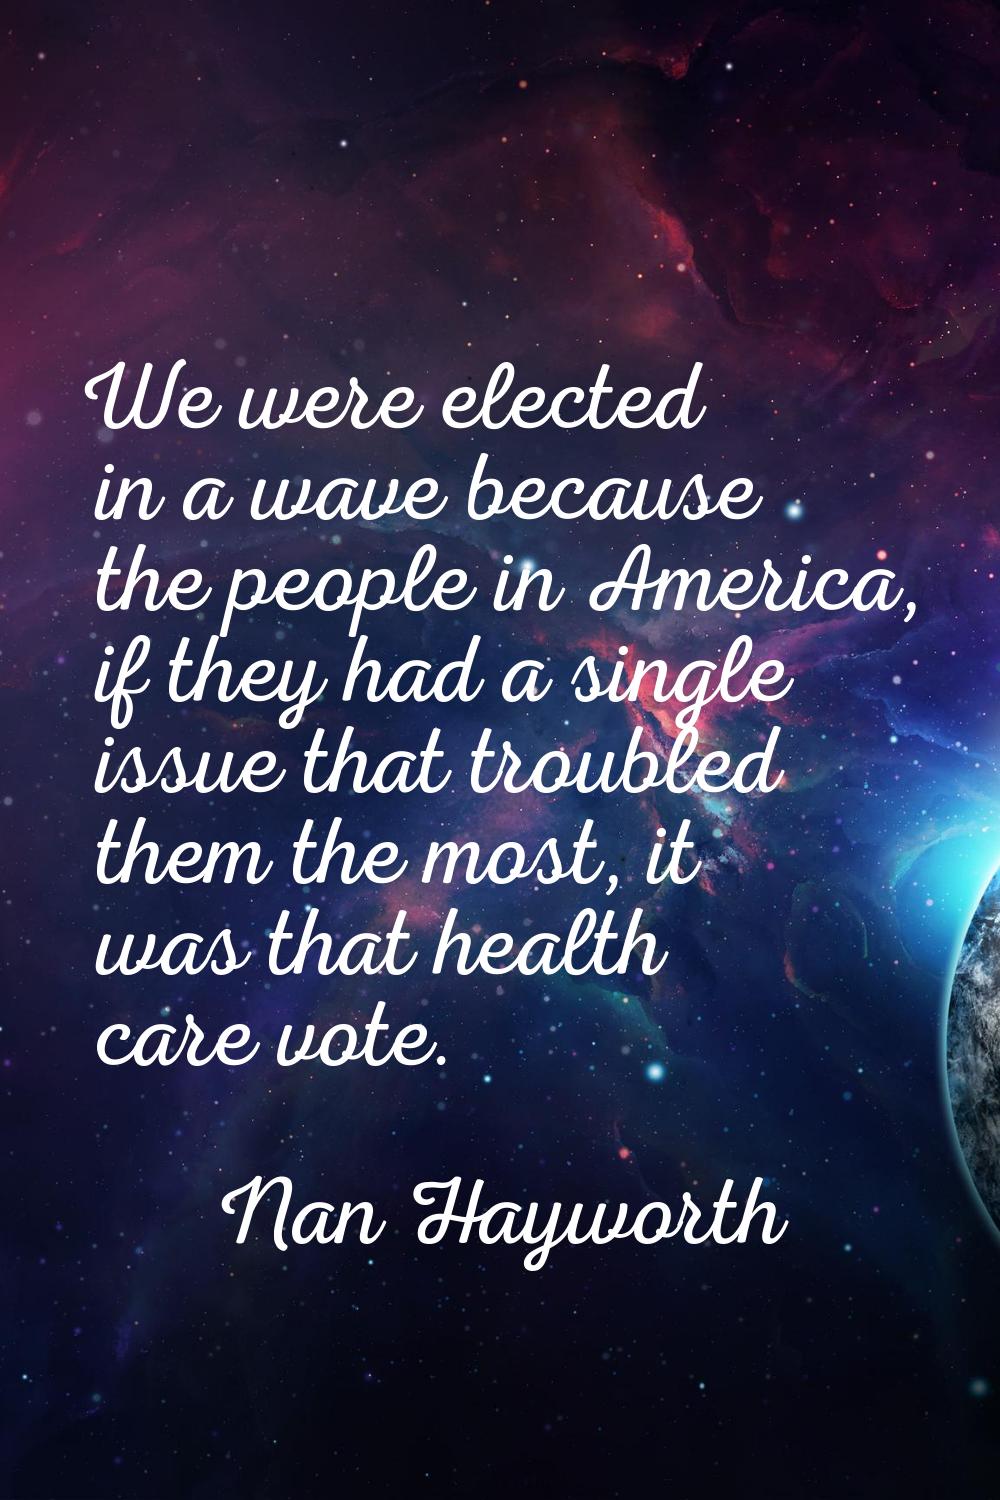 We were elected in a wave because the people in America, if they had a single issue that troubled t